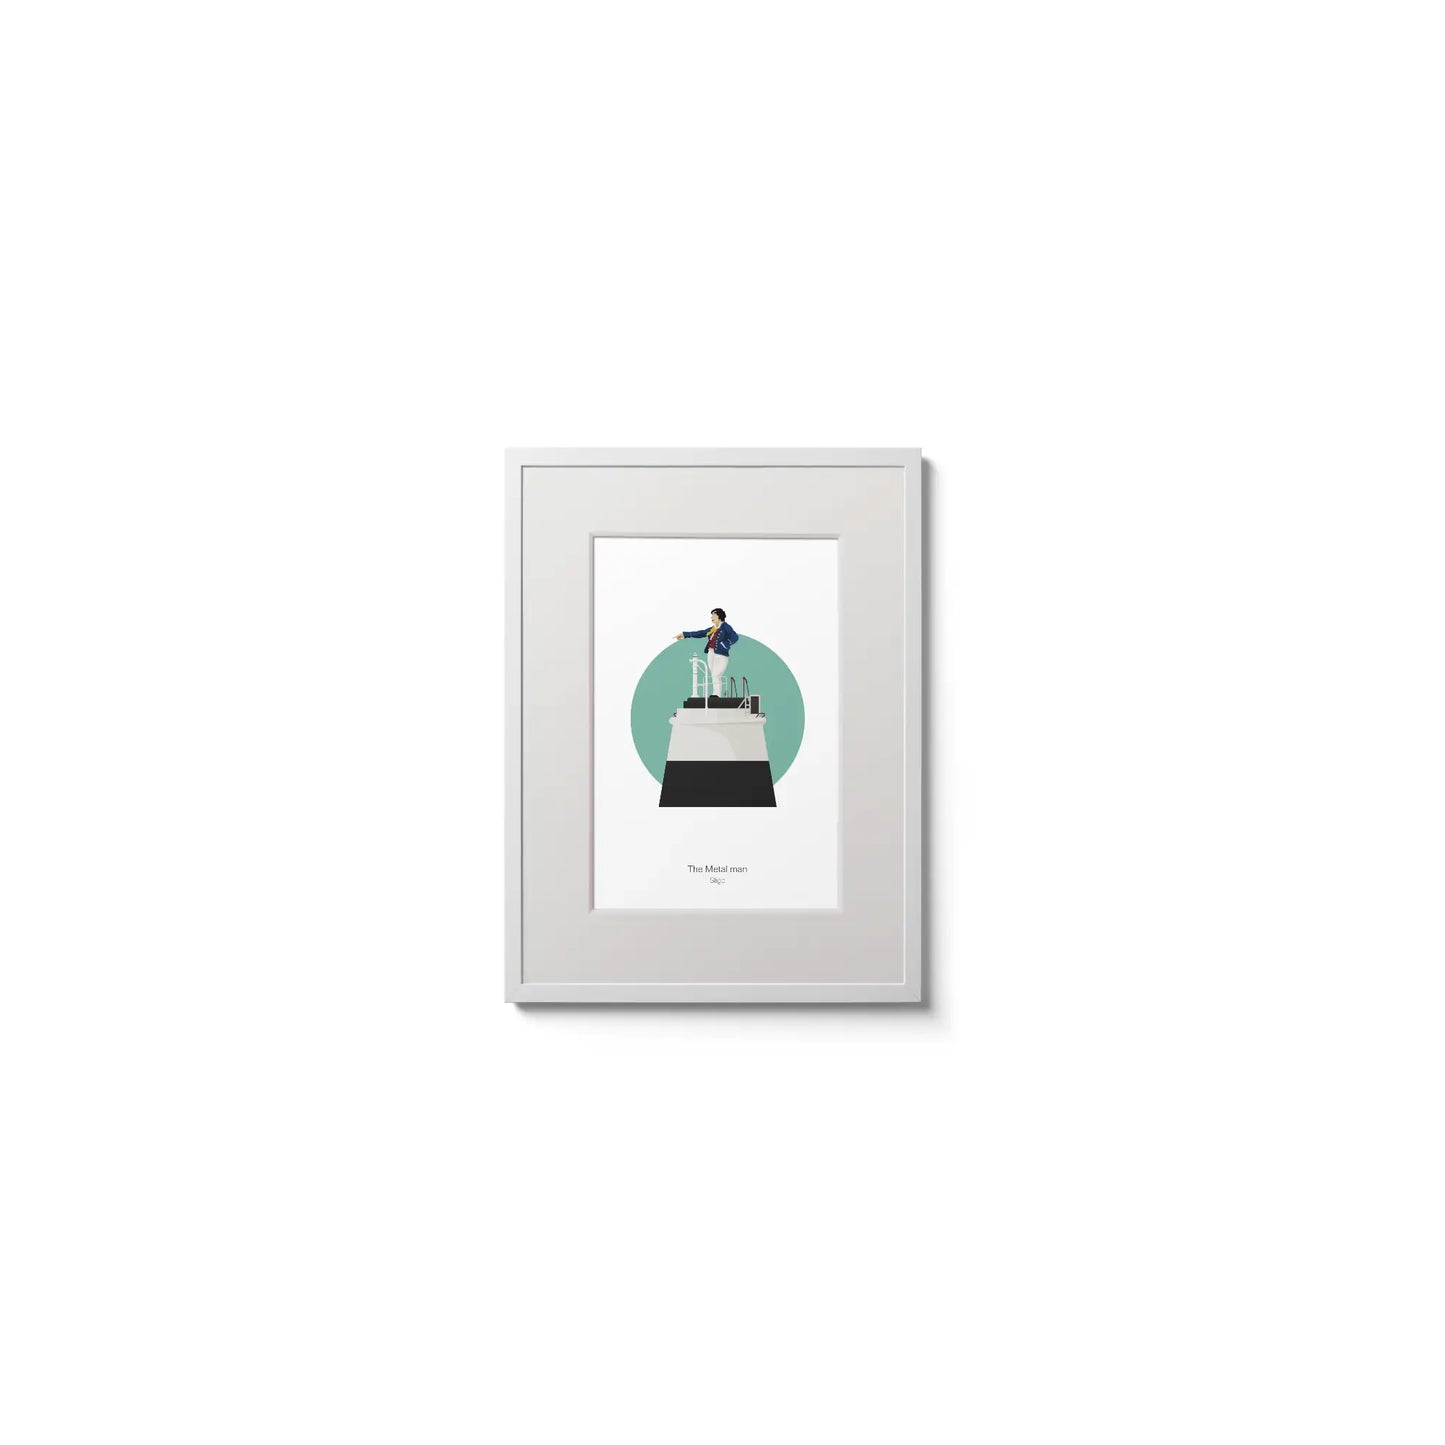 Contemporary graphic illustration of the Metal Man lighthouse on a white background inside light blue square,  in a white frame measuring 30x40cm.